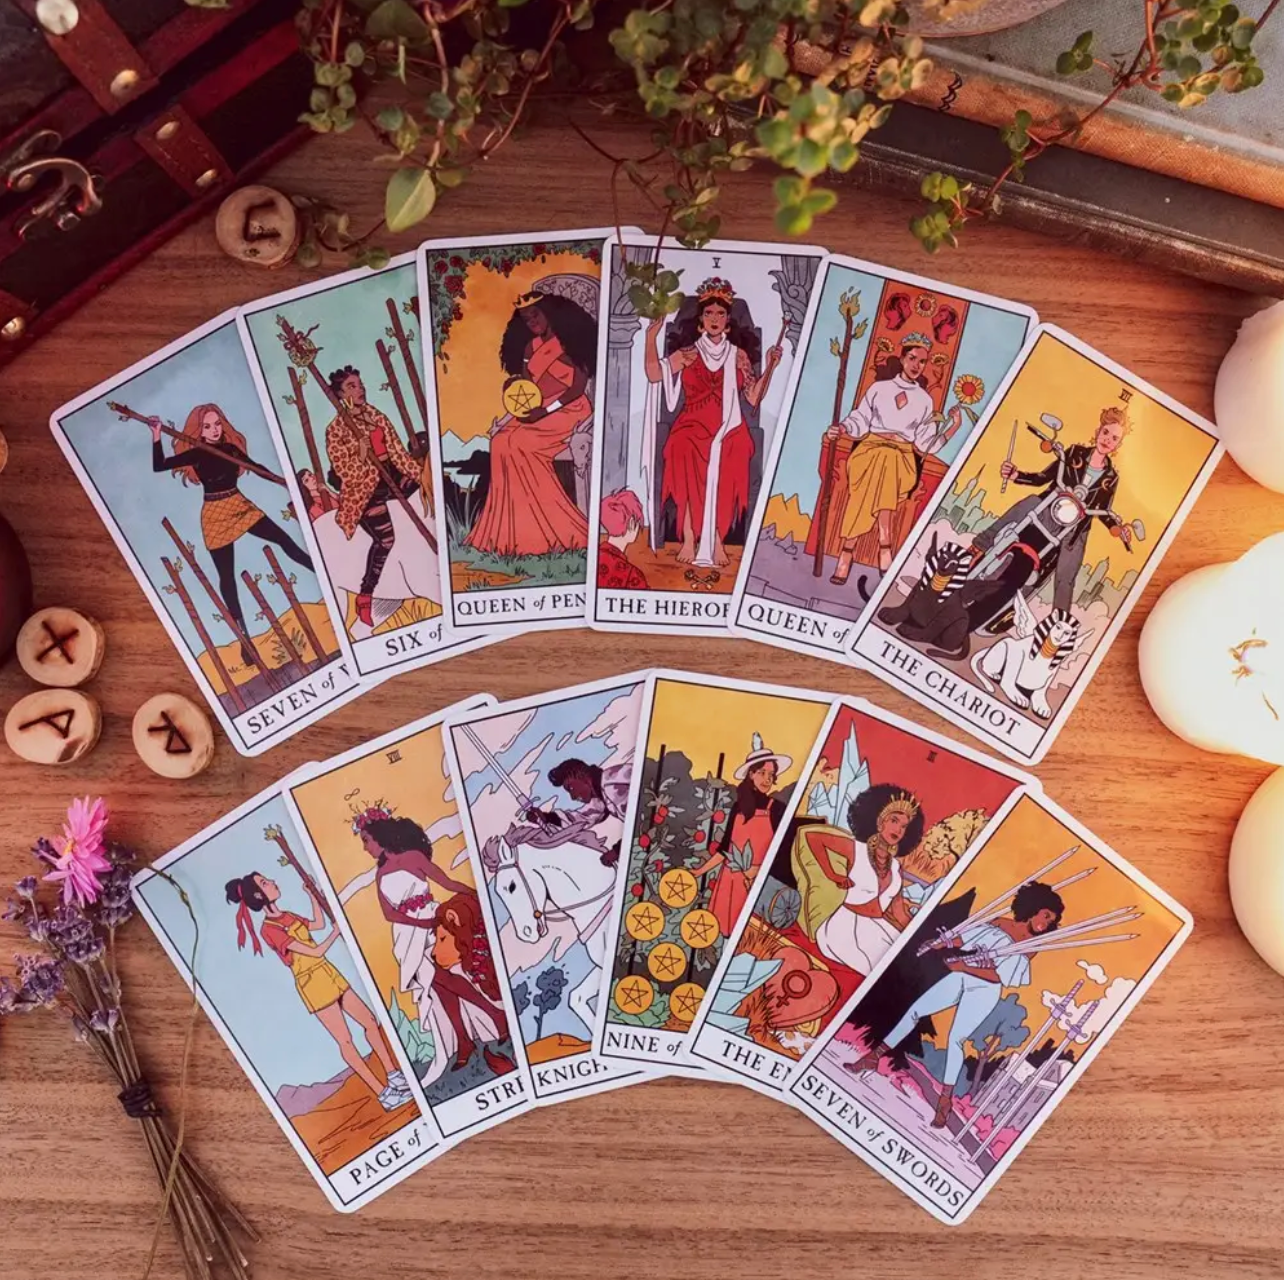 The Healing Hedge Witch Circle - A Beginners Guide to Tarot - The Major Arcana